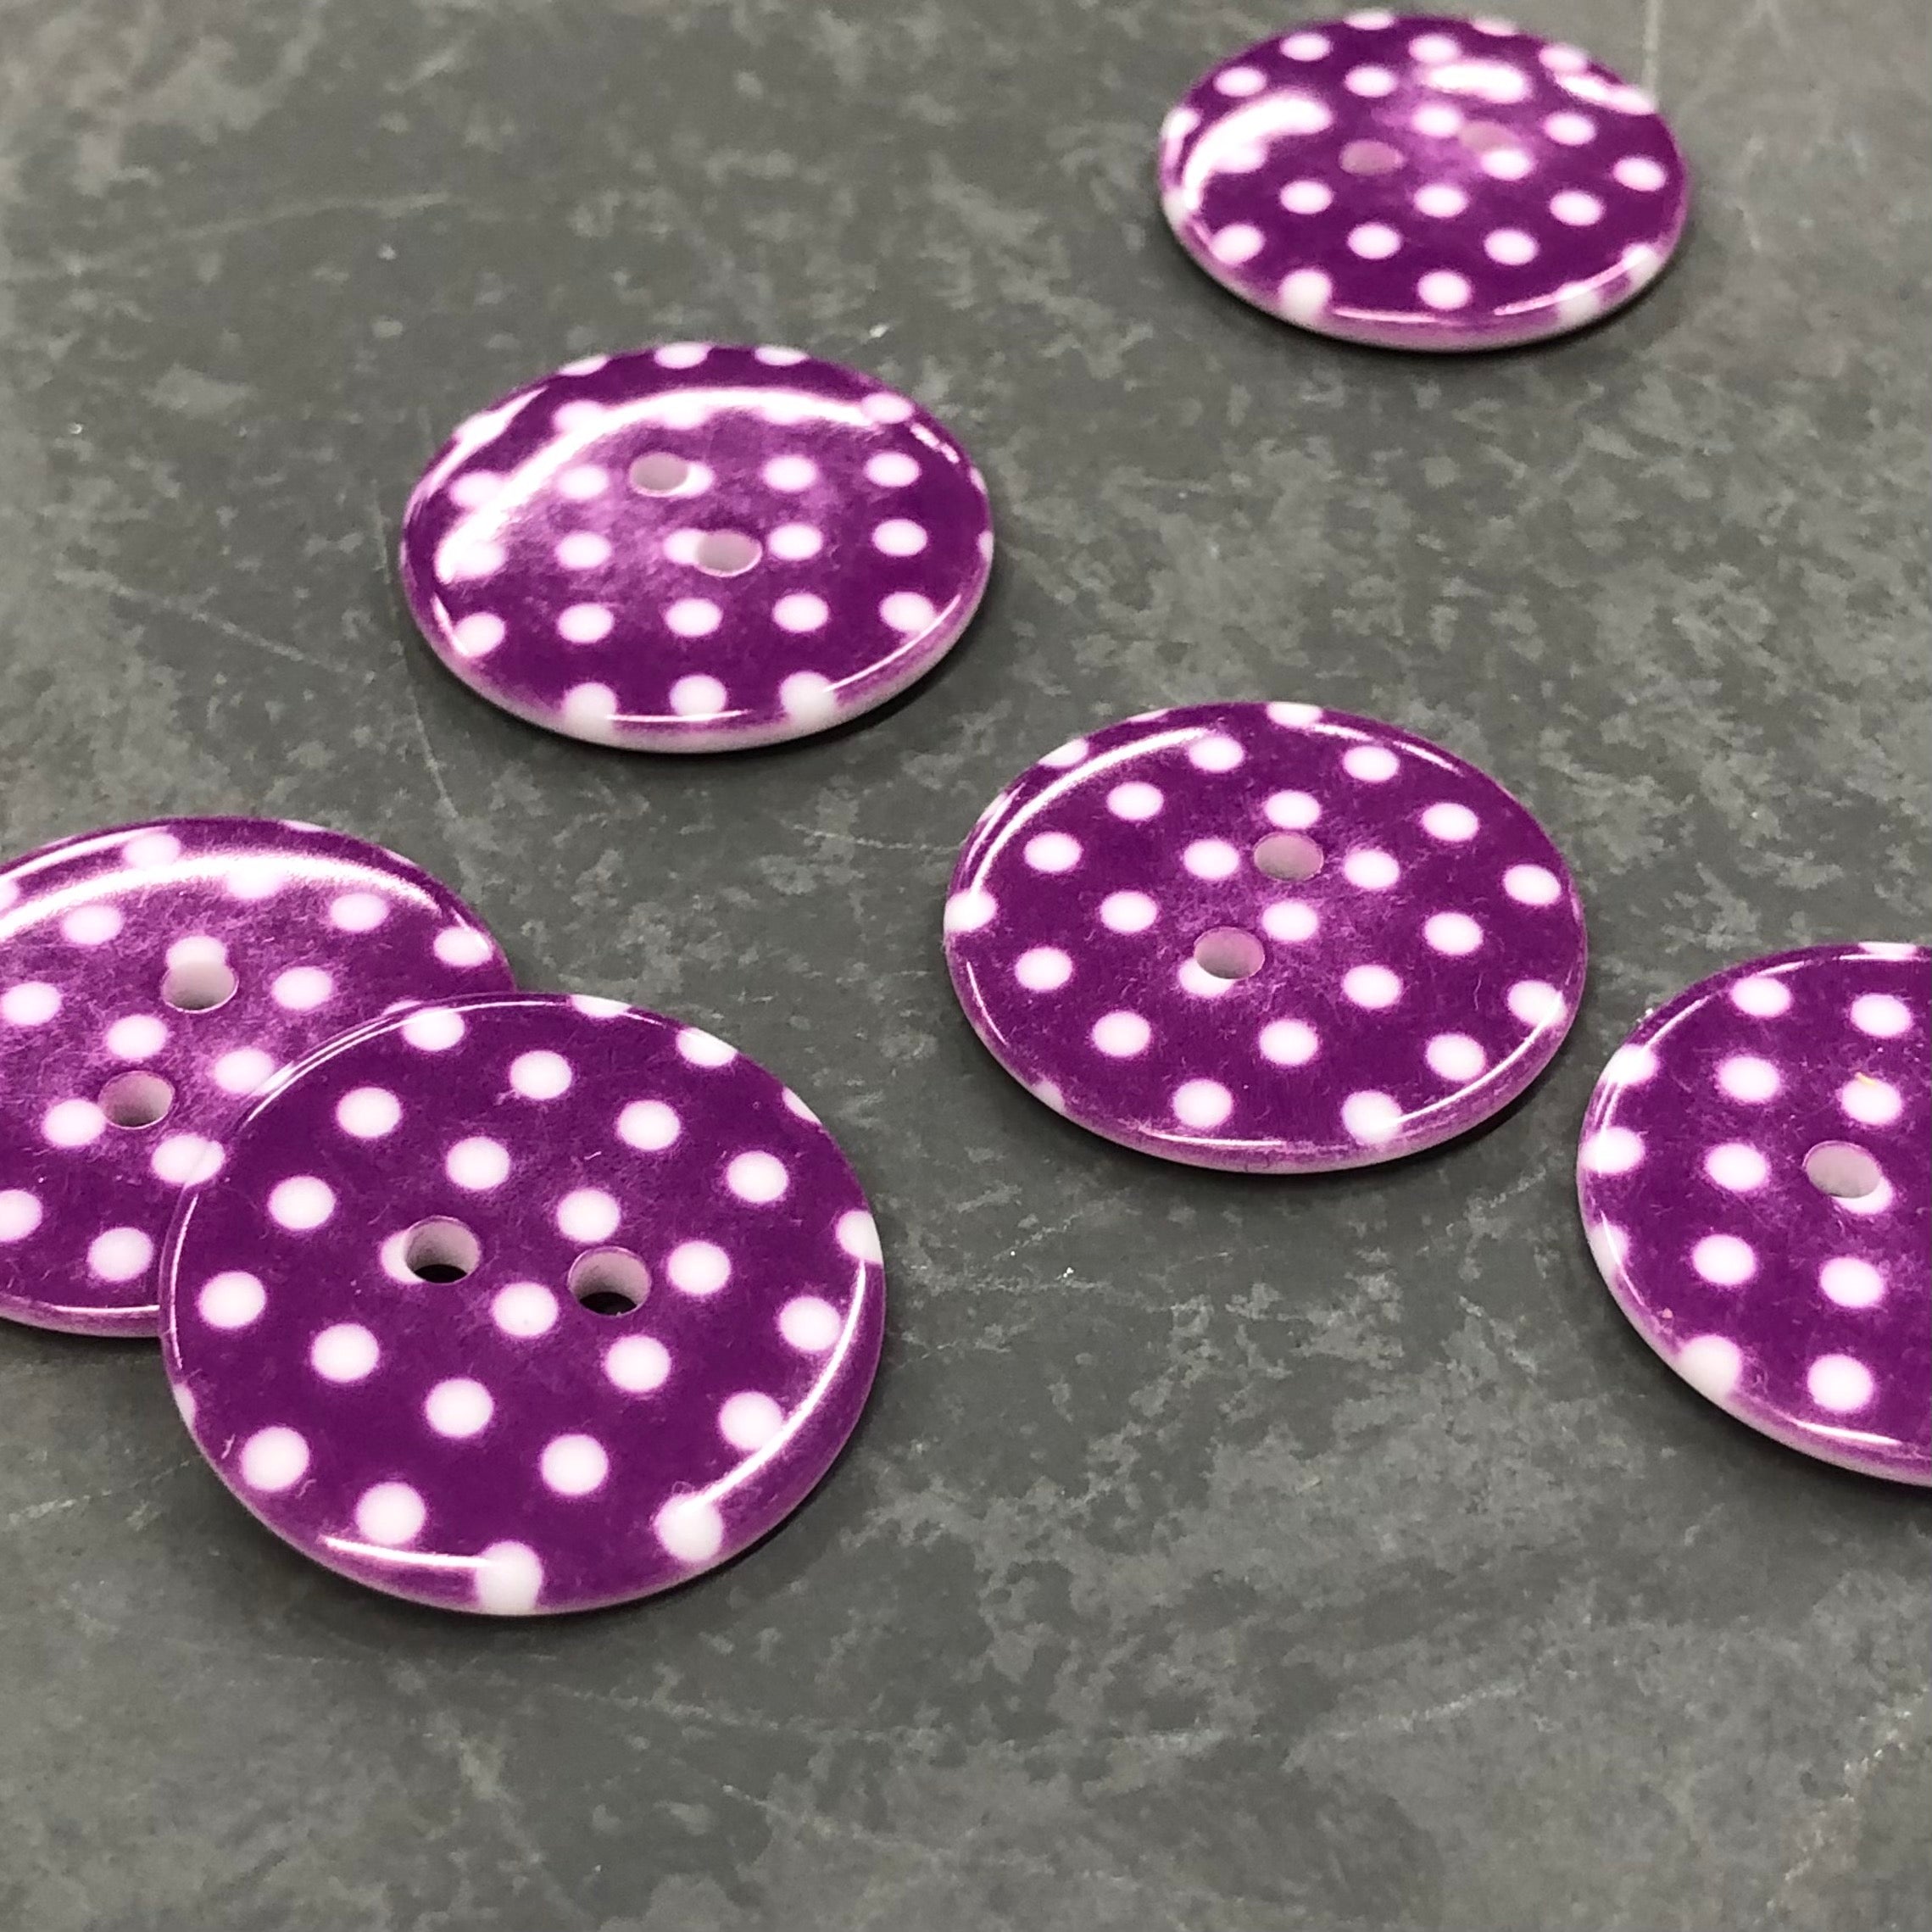 23mm diameter Polka Dot Buttons Purple and White